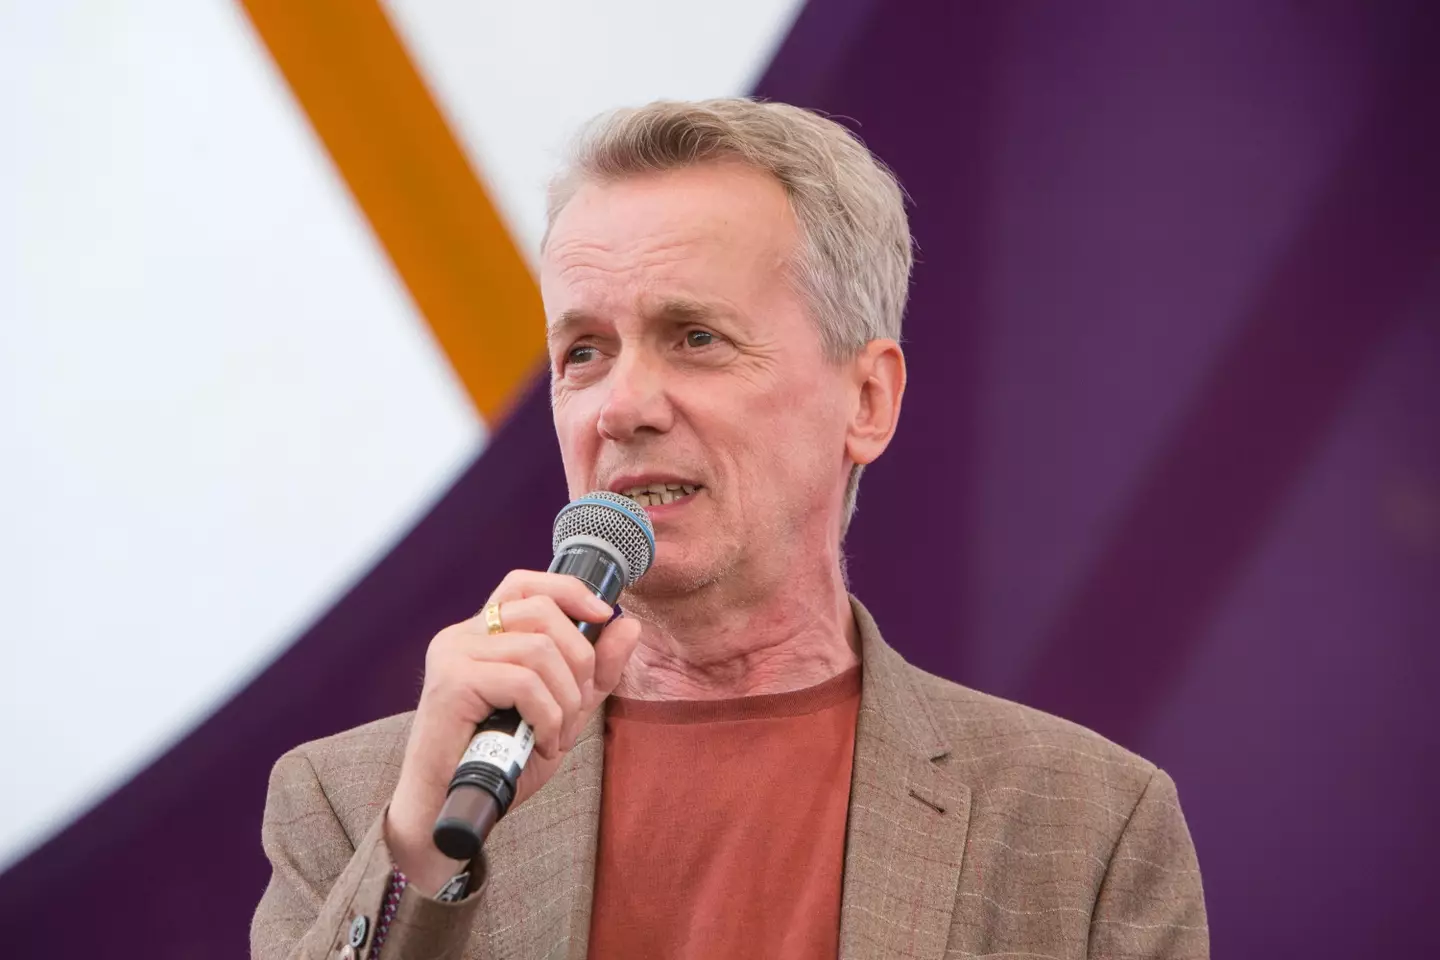 Frank Skinner has admitted to being 'racist' and 'homophobic' in his younger days.